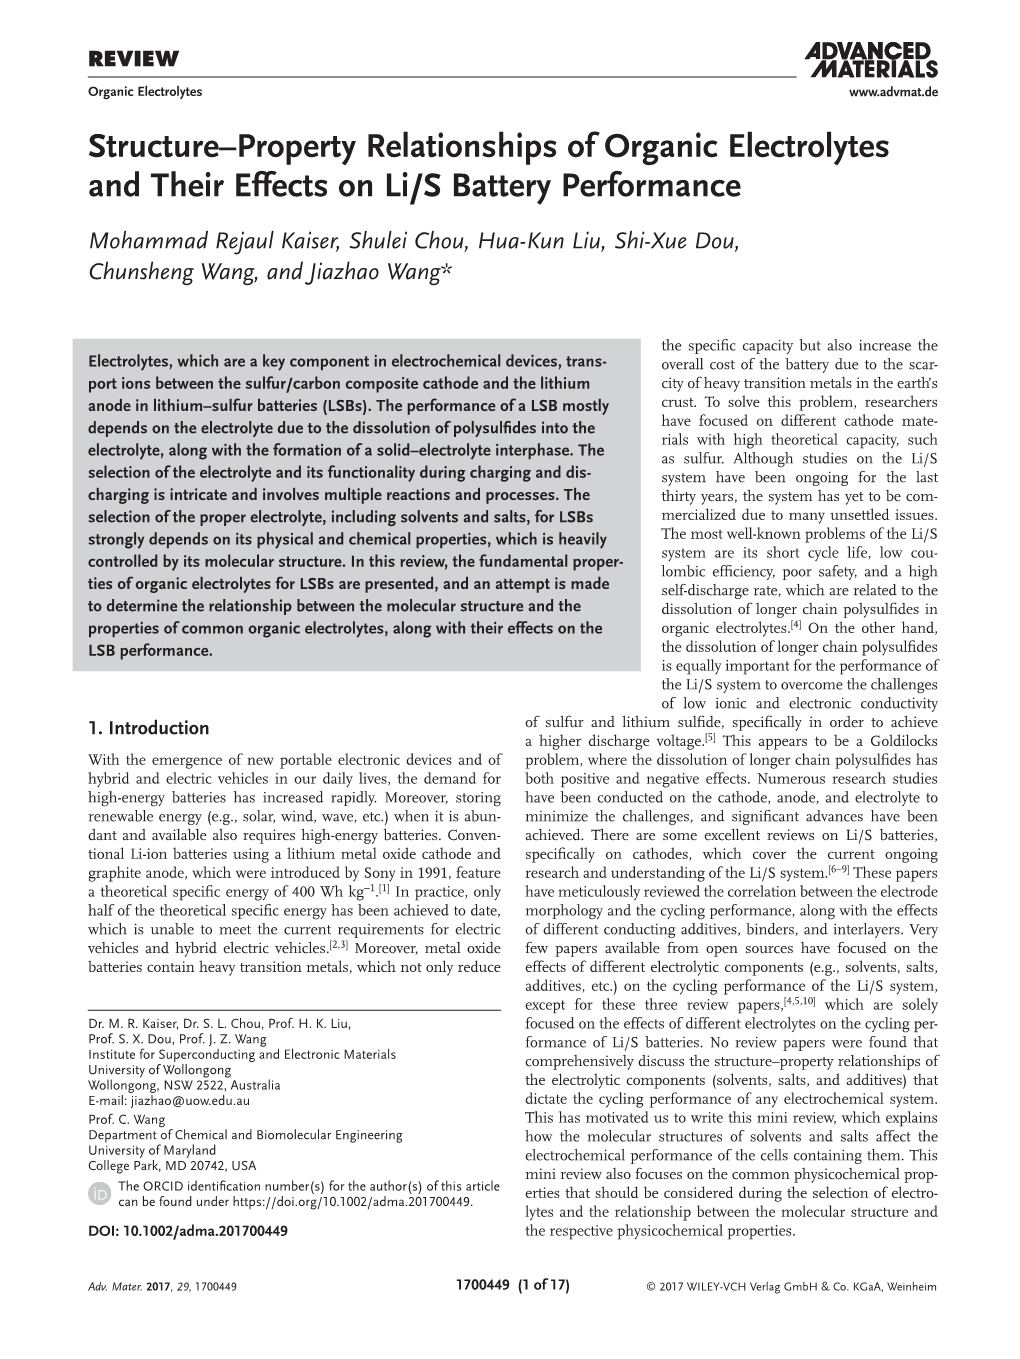 Property Relationships of Organic Electrolytes and Their Effects on Li/S Battery Performance